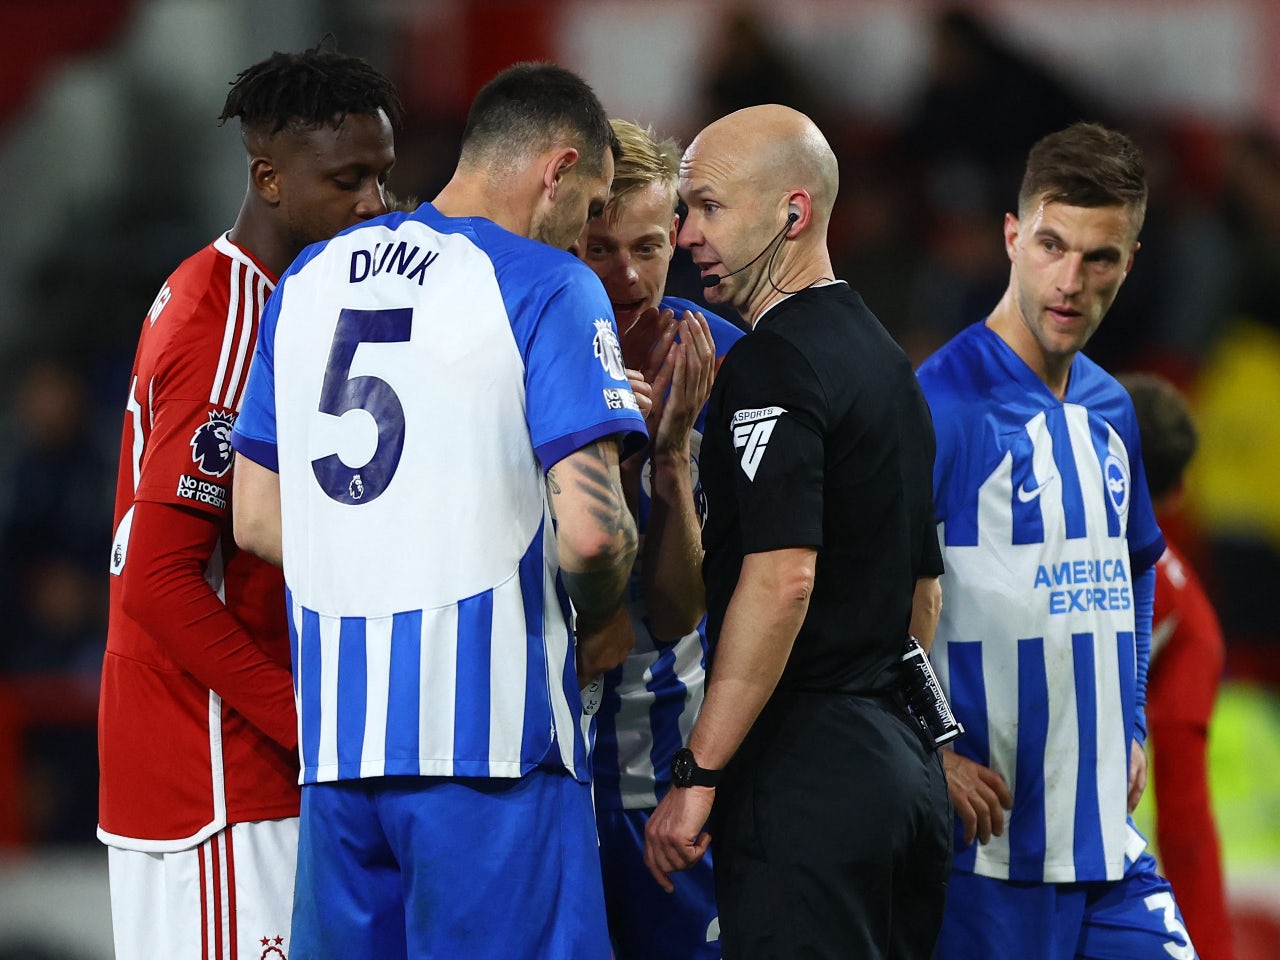 Brighton & Hove Albion's Lewis Dunk to miss Chelsea, Brentford matches